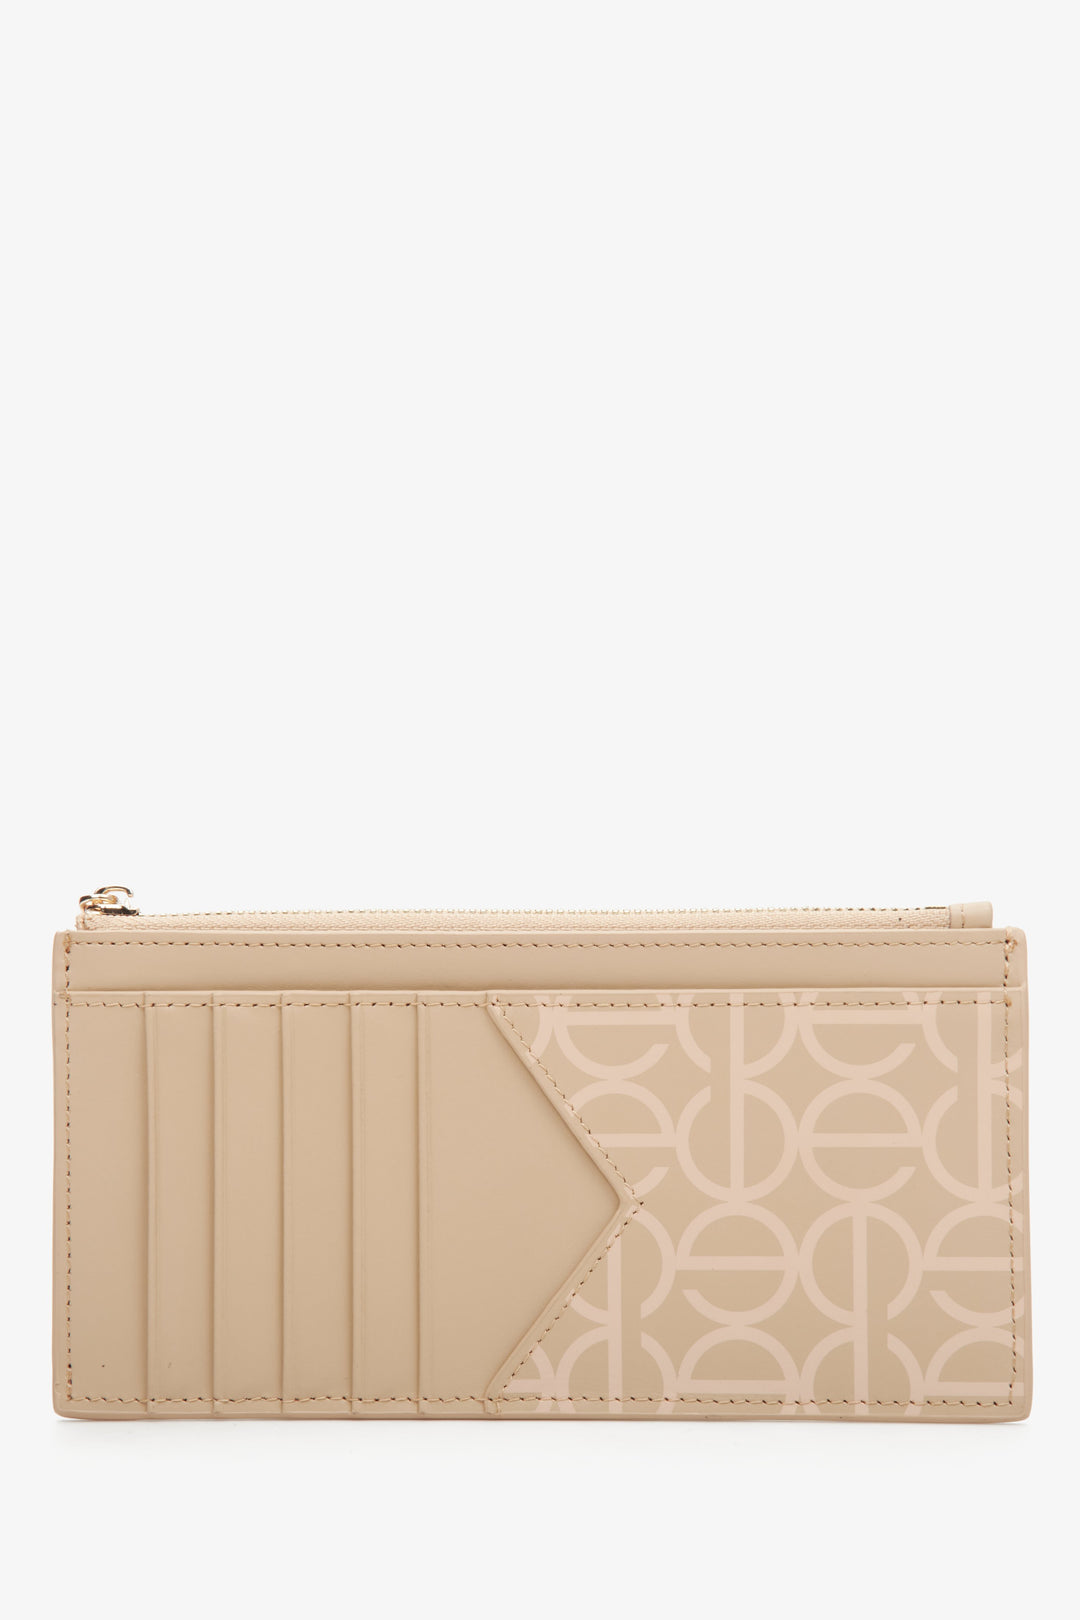 Large beige women's wristlet by Estro, made of genuine leather with golden accents - reverse side.